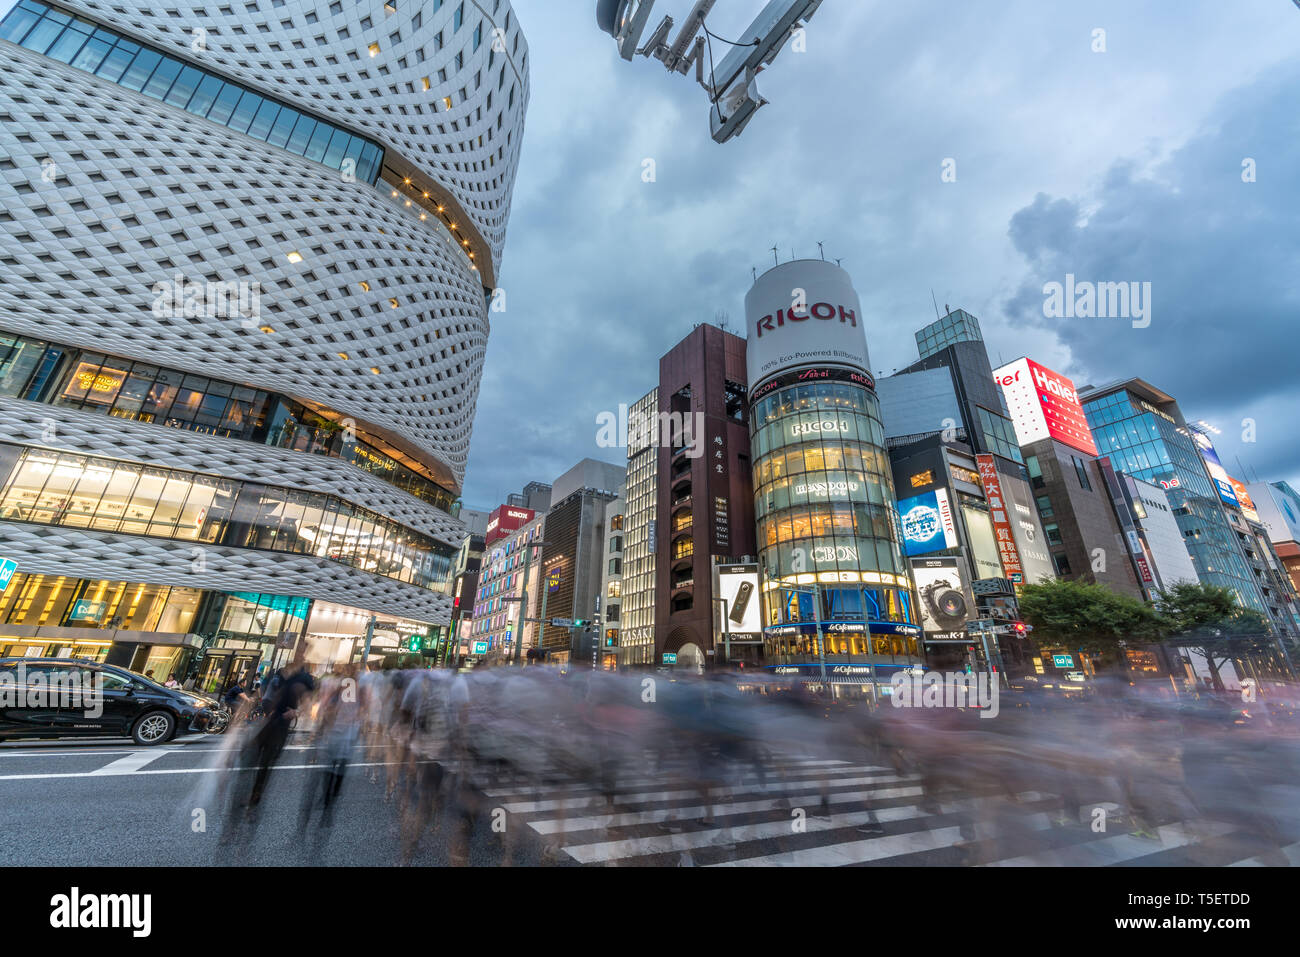 Tokyo Chuo Ward Ginza August 13 17 View Of Motion Blurred People And Cars At Ginza Crossroad Between Chuo Dori And Harumi Dori Streets Stock Photo Alamy